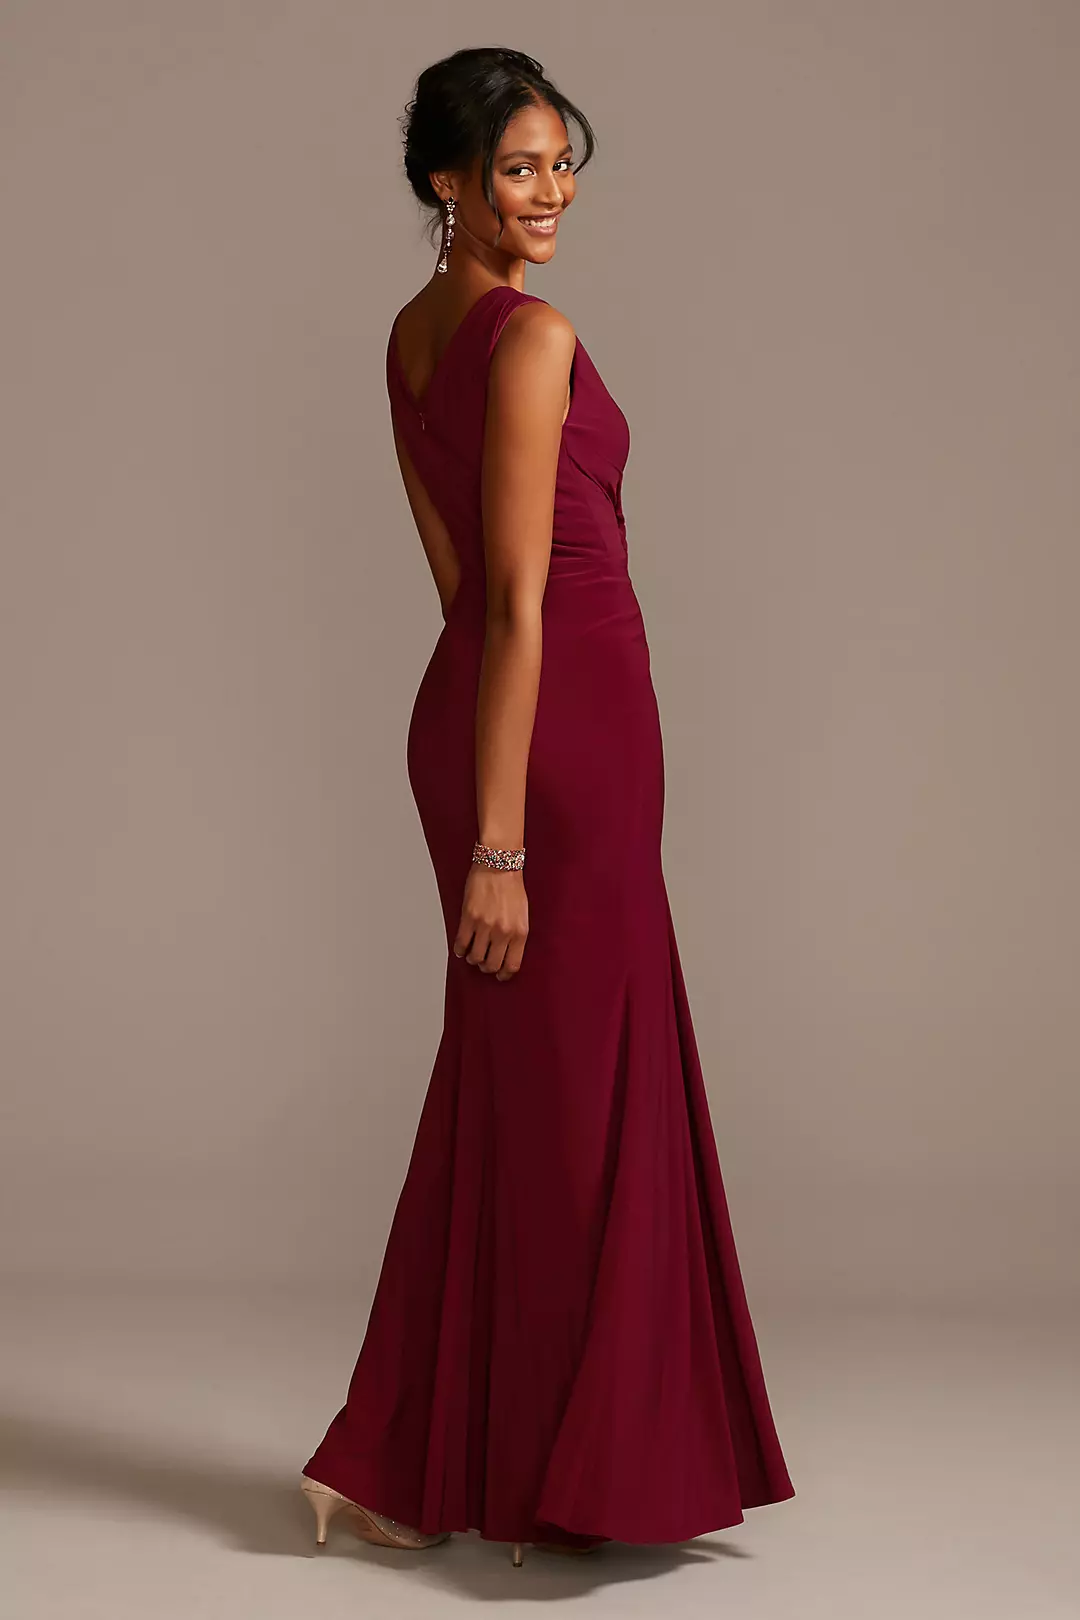 Draped V-Neck Jersey Dress with Crystal Applique Image 2